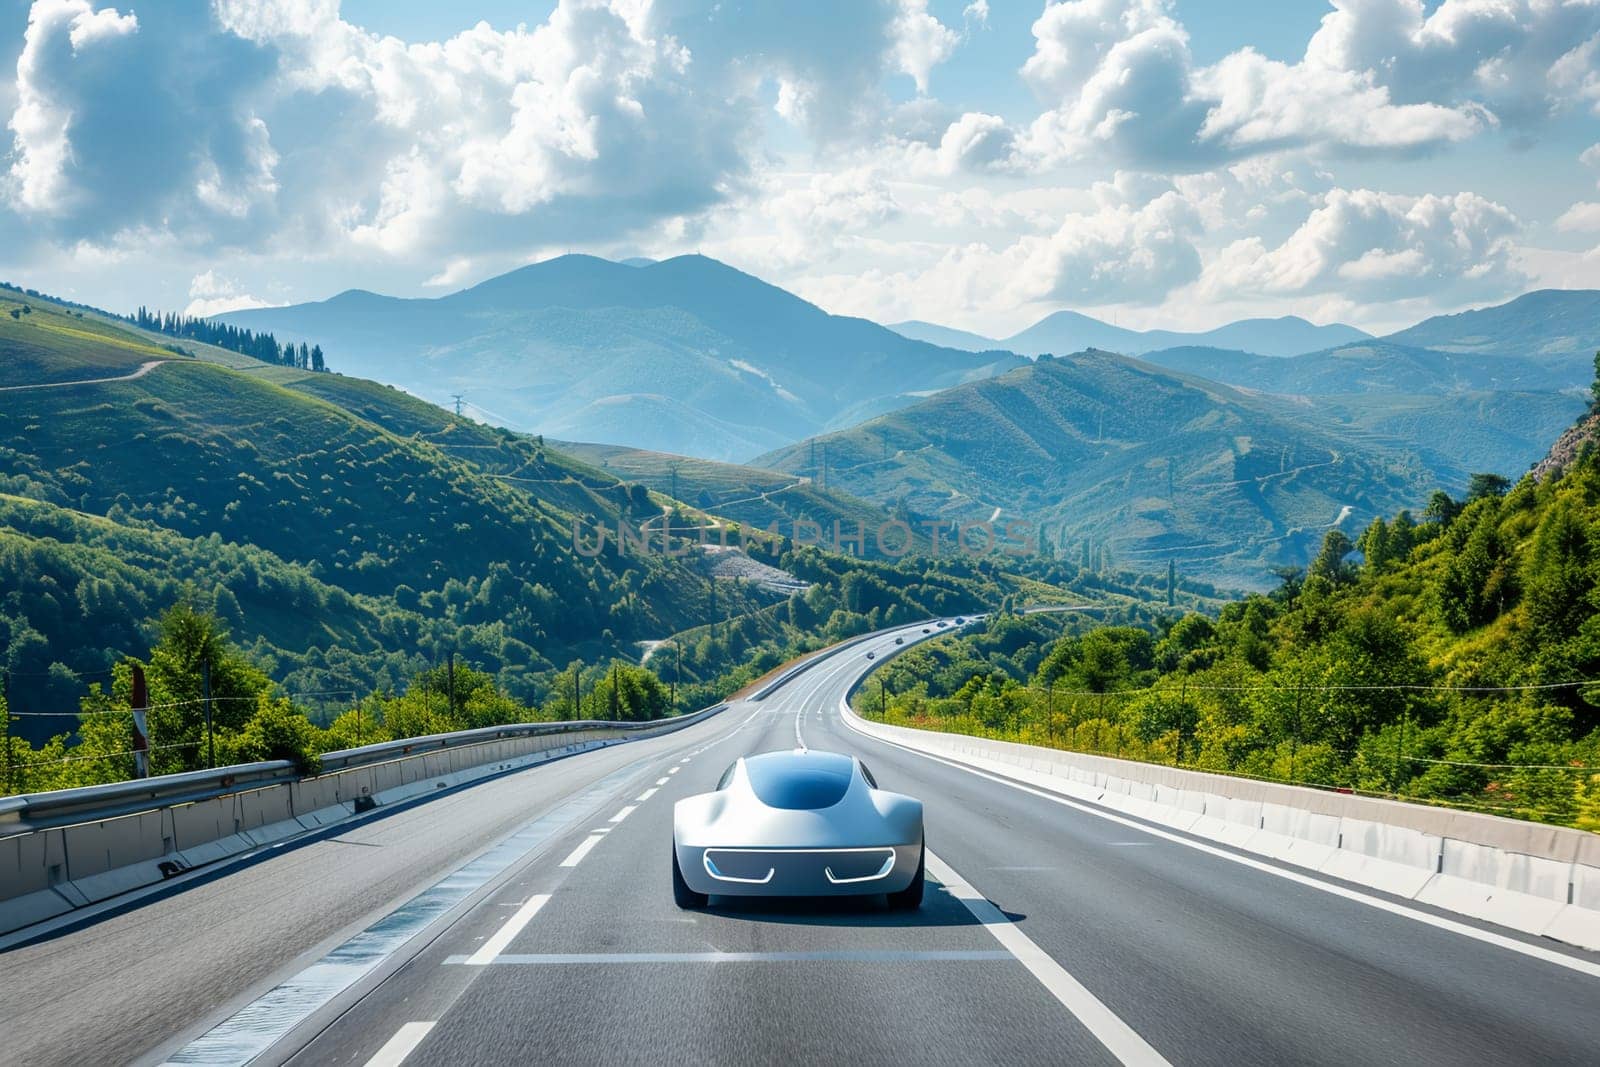 Futuristic electric vehicle on scenic mountain highway with lush green landscape under blue sky. Concept of innovation, electric cars, road trips, and sustainable technology.